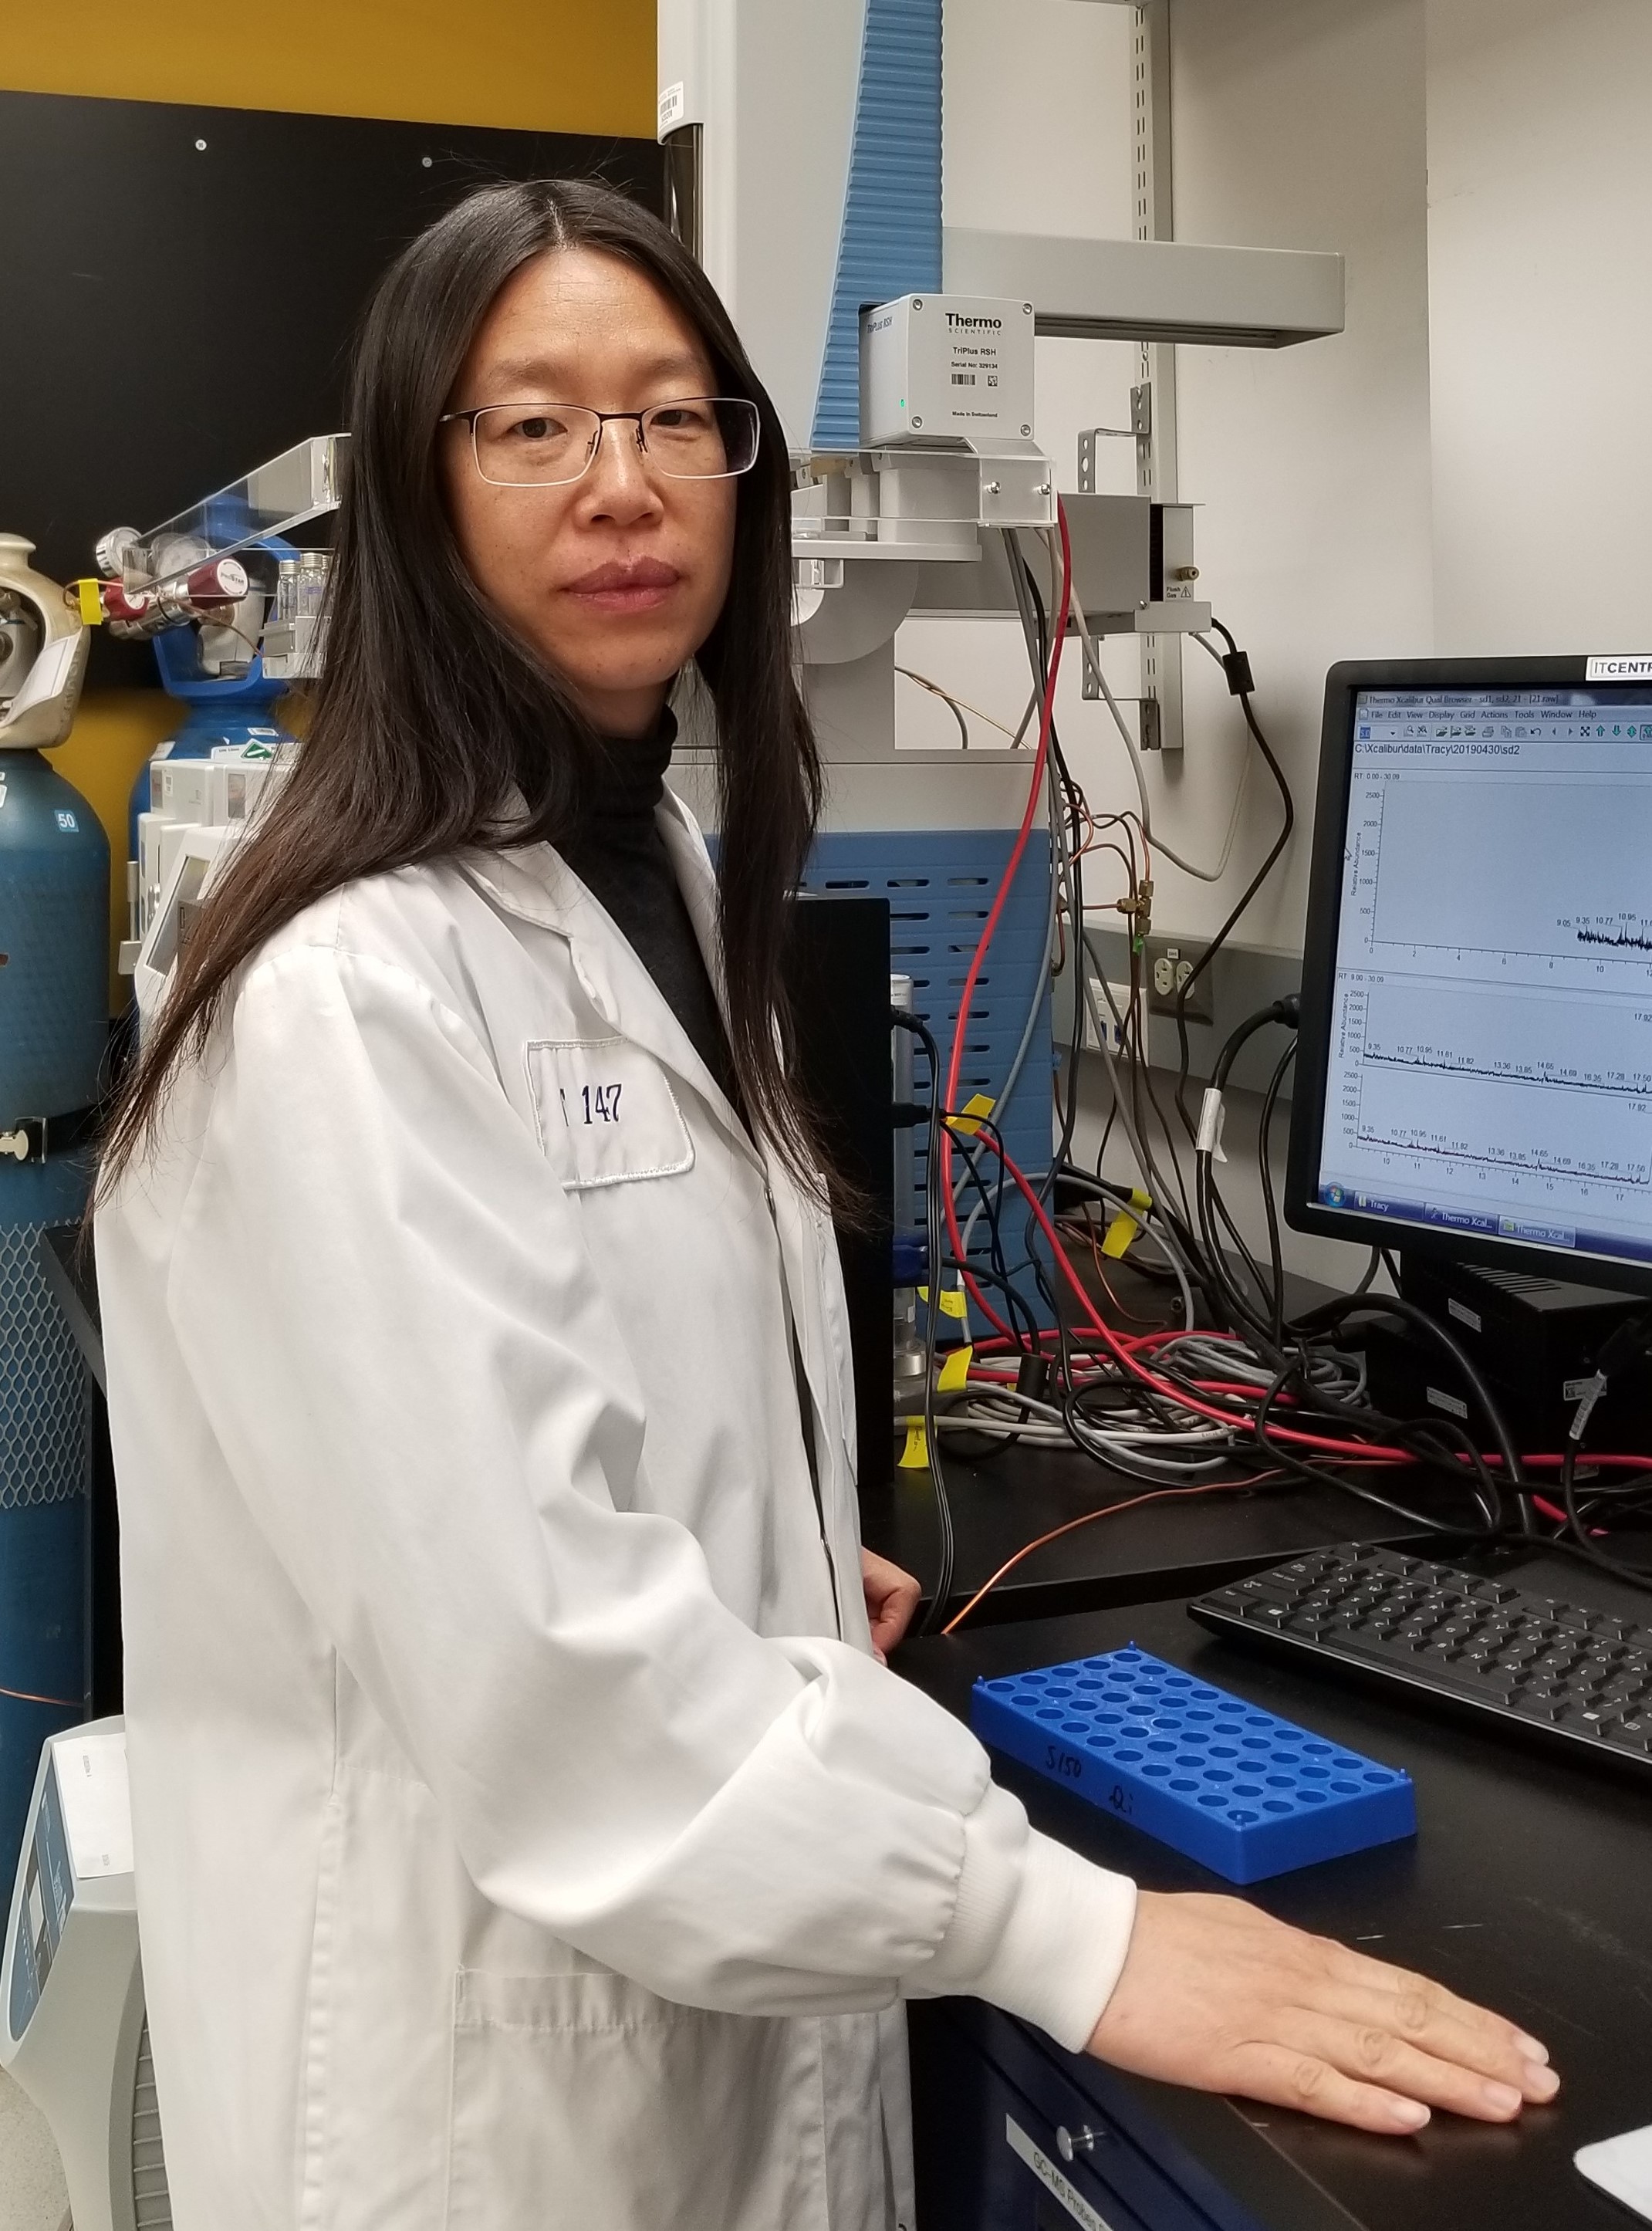 Dr. Suqin Shao standing at a computer in her laboratory